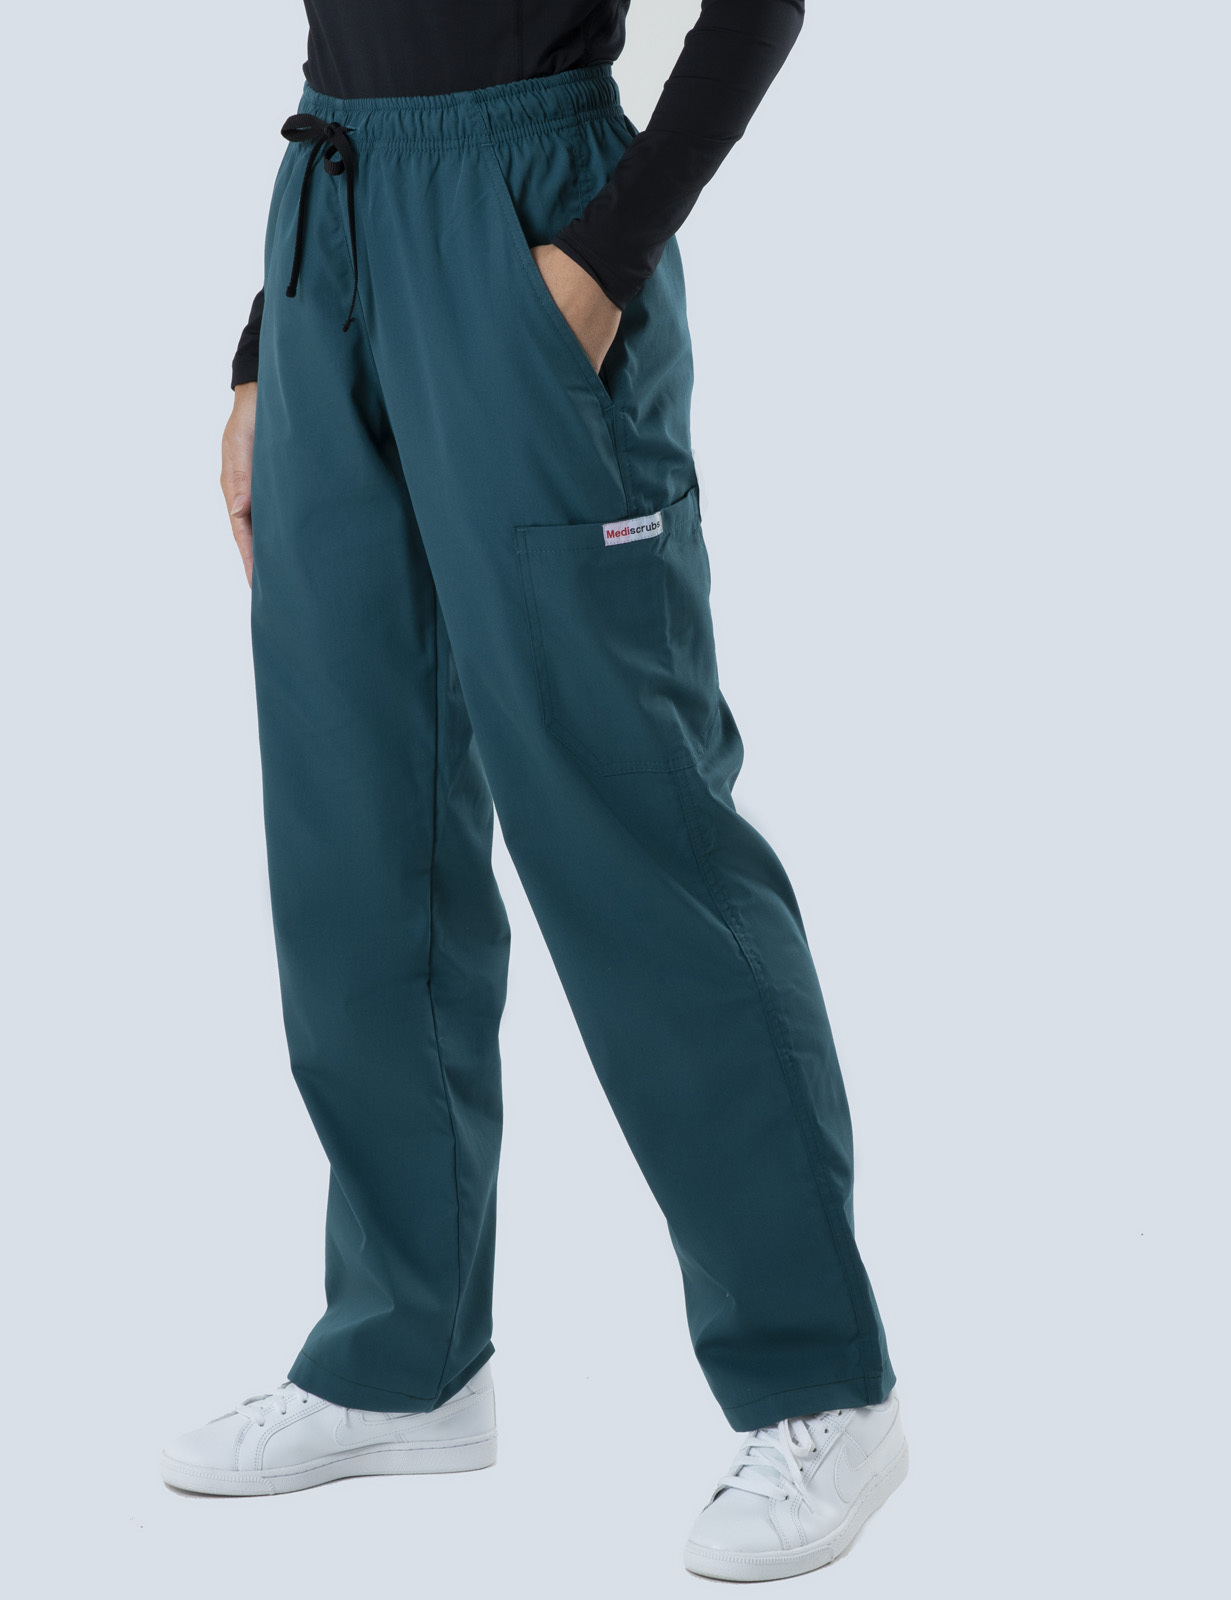 Ipswich Hospital Physiotherapy Cargo Pant Only Bundle (Cargo Pants in Caribbean)